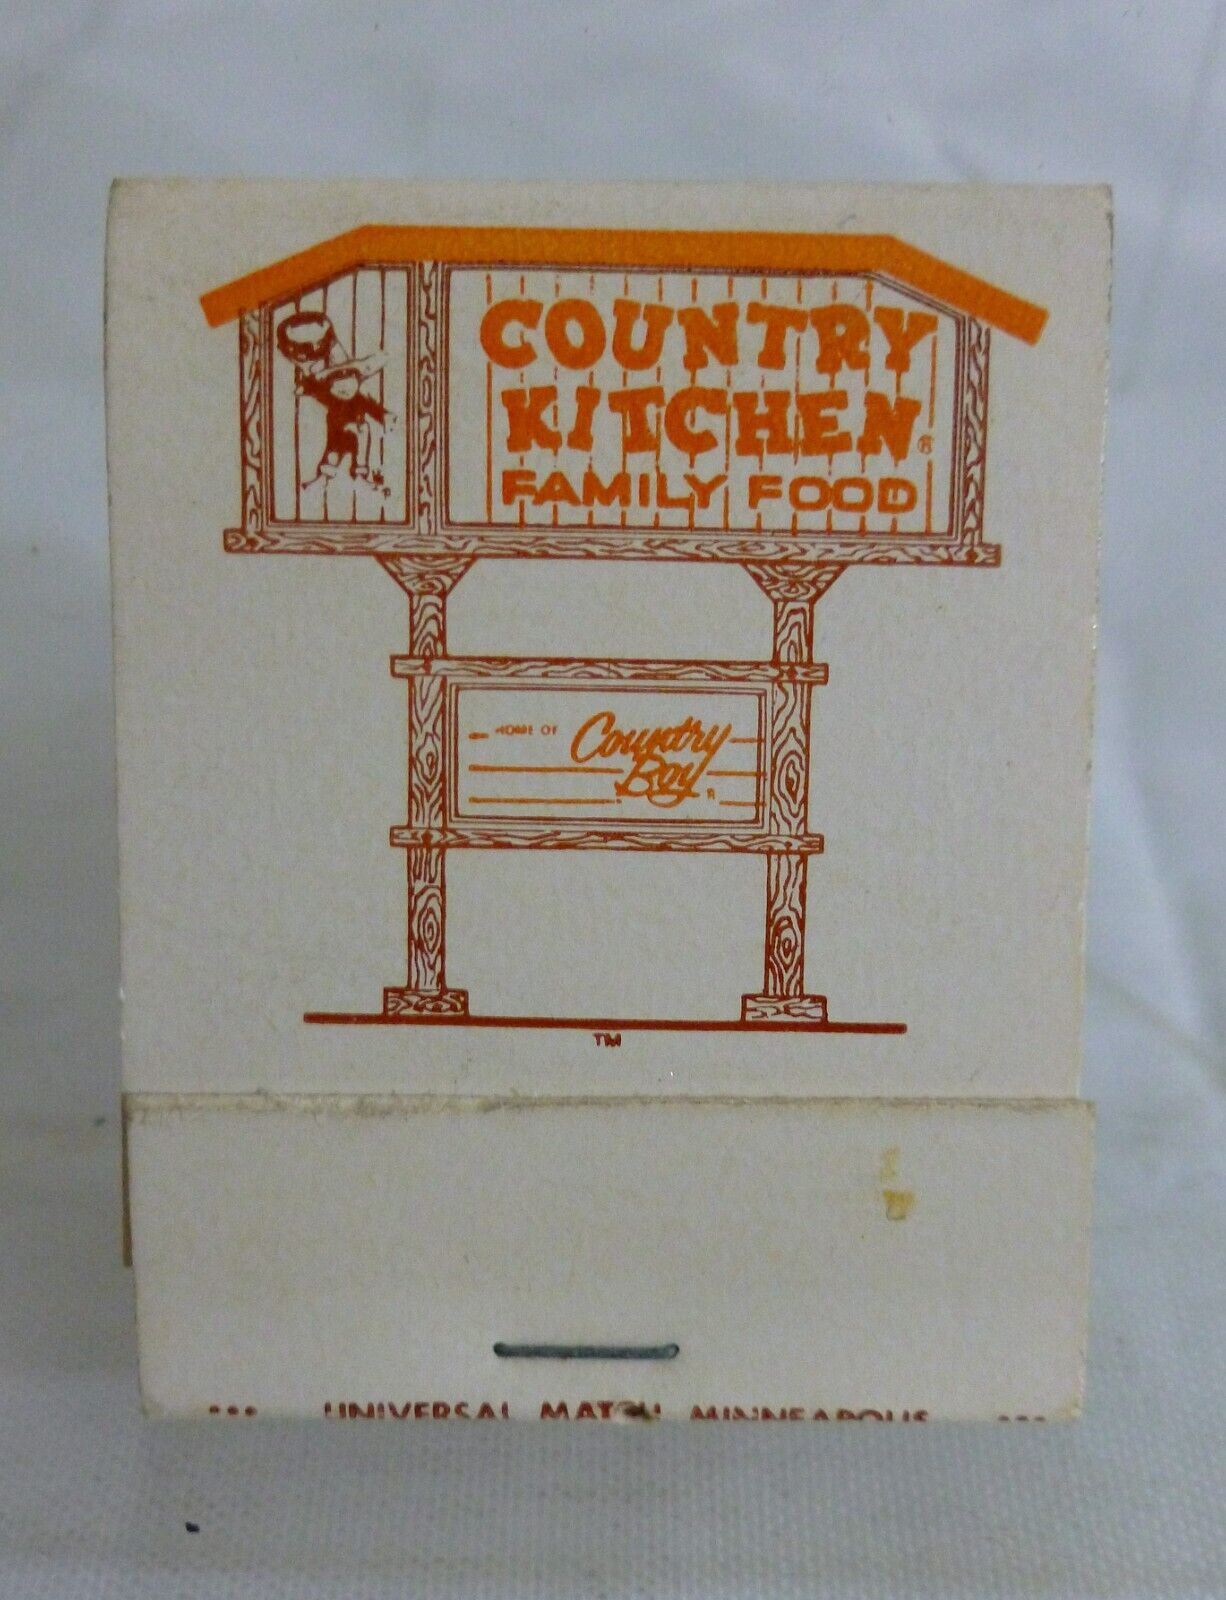 Vintage Matchbook Unstruck - Country Kitchen Family Food - Country Boy